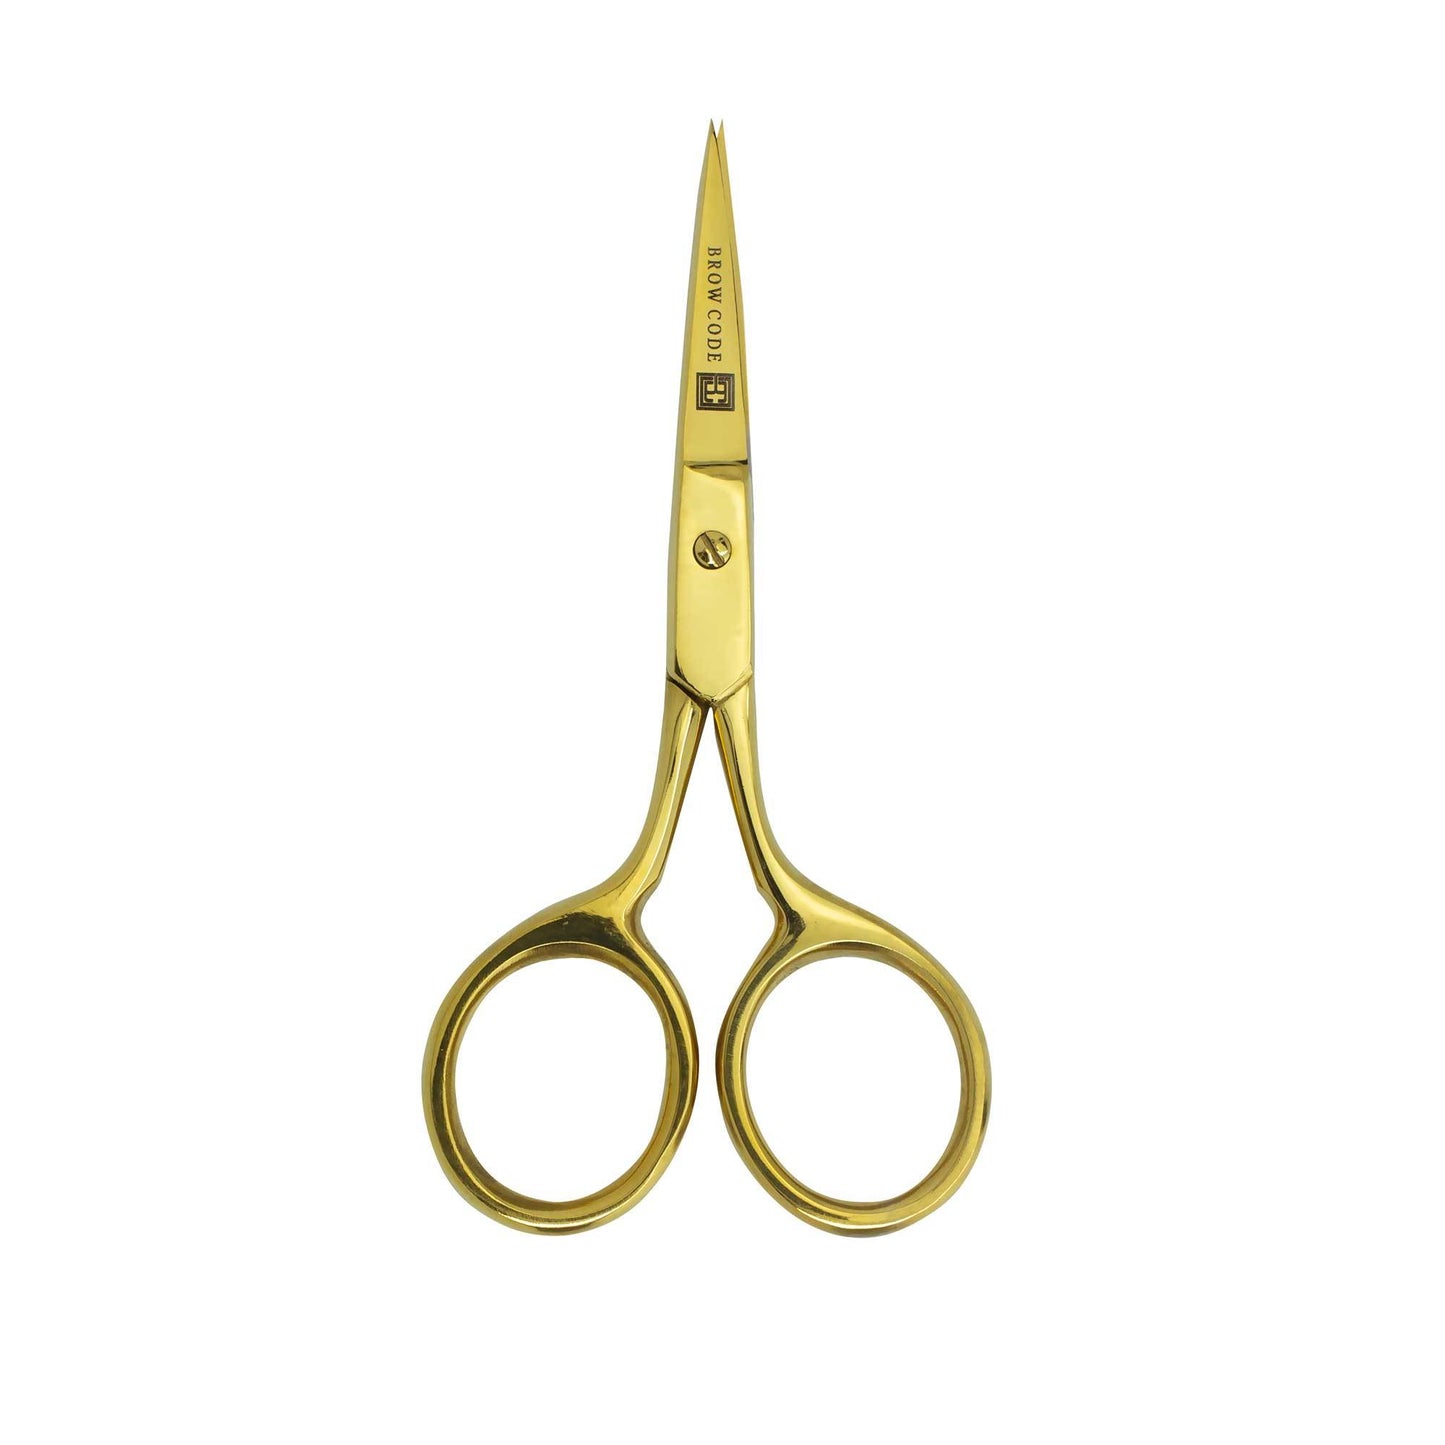 Trimming Scissors on a white background